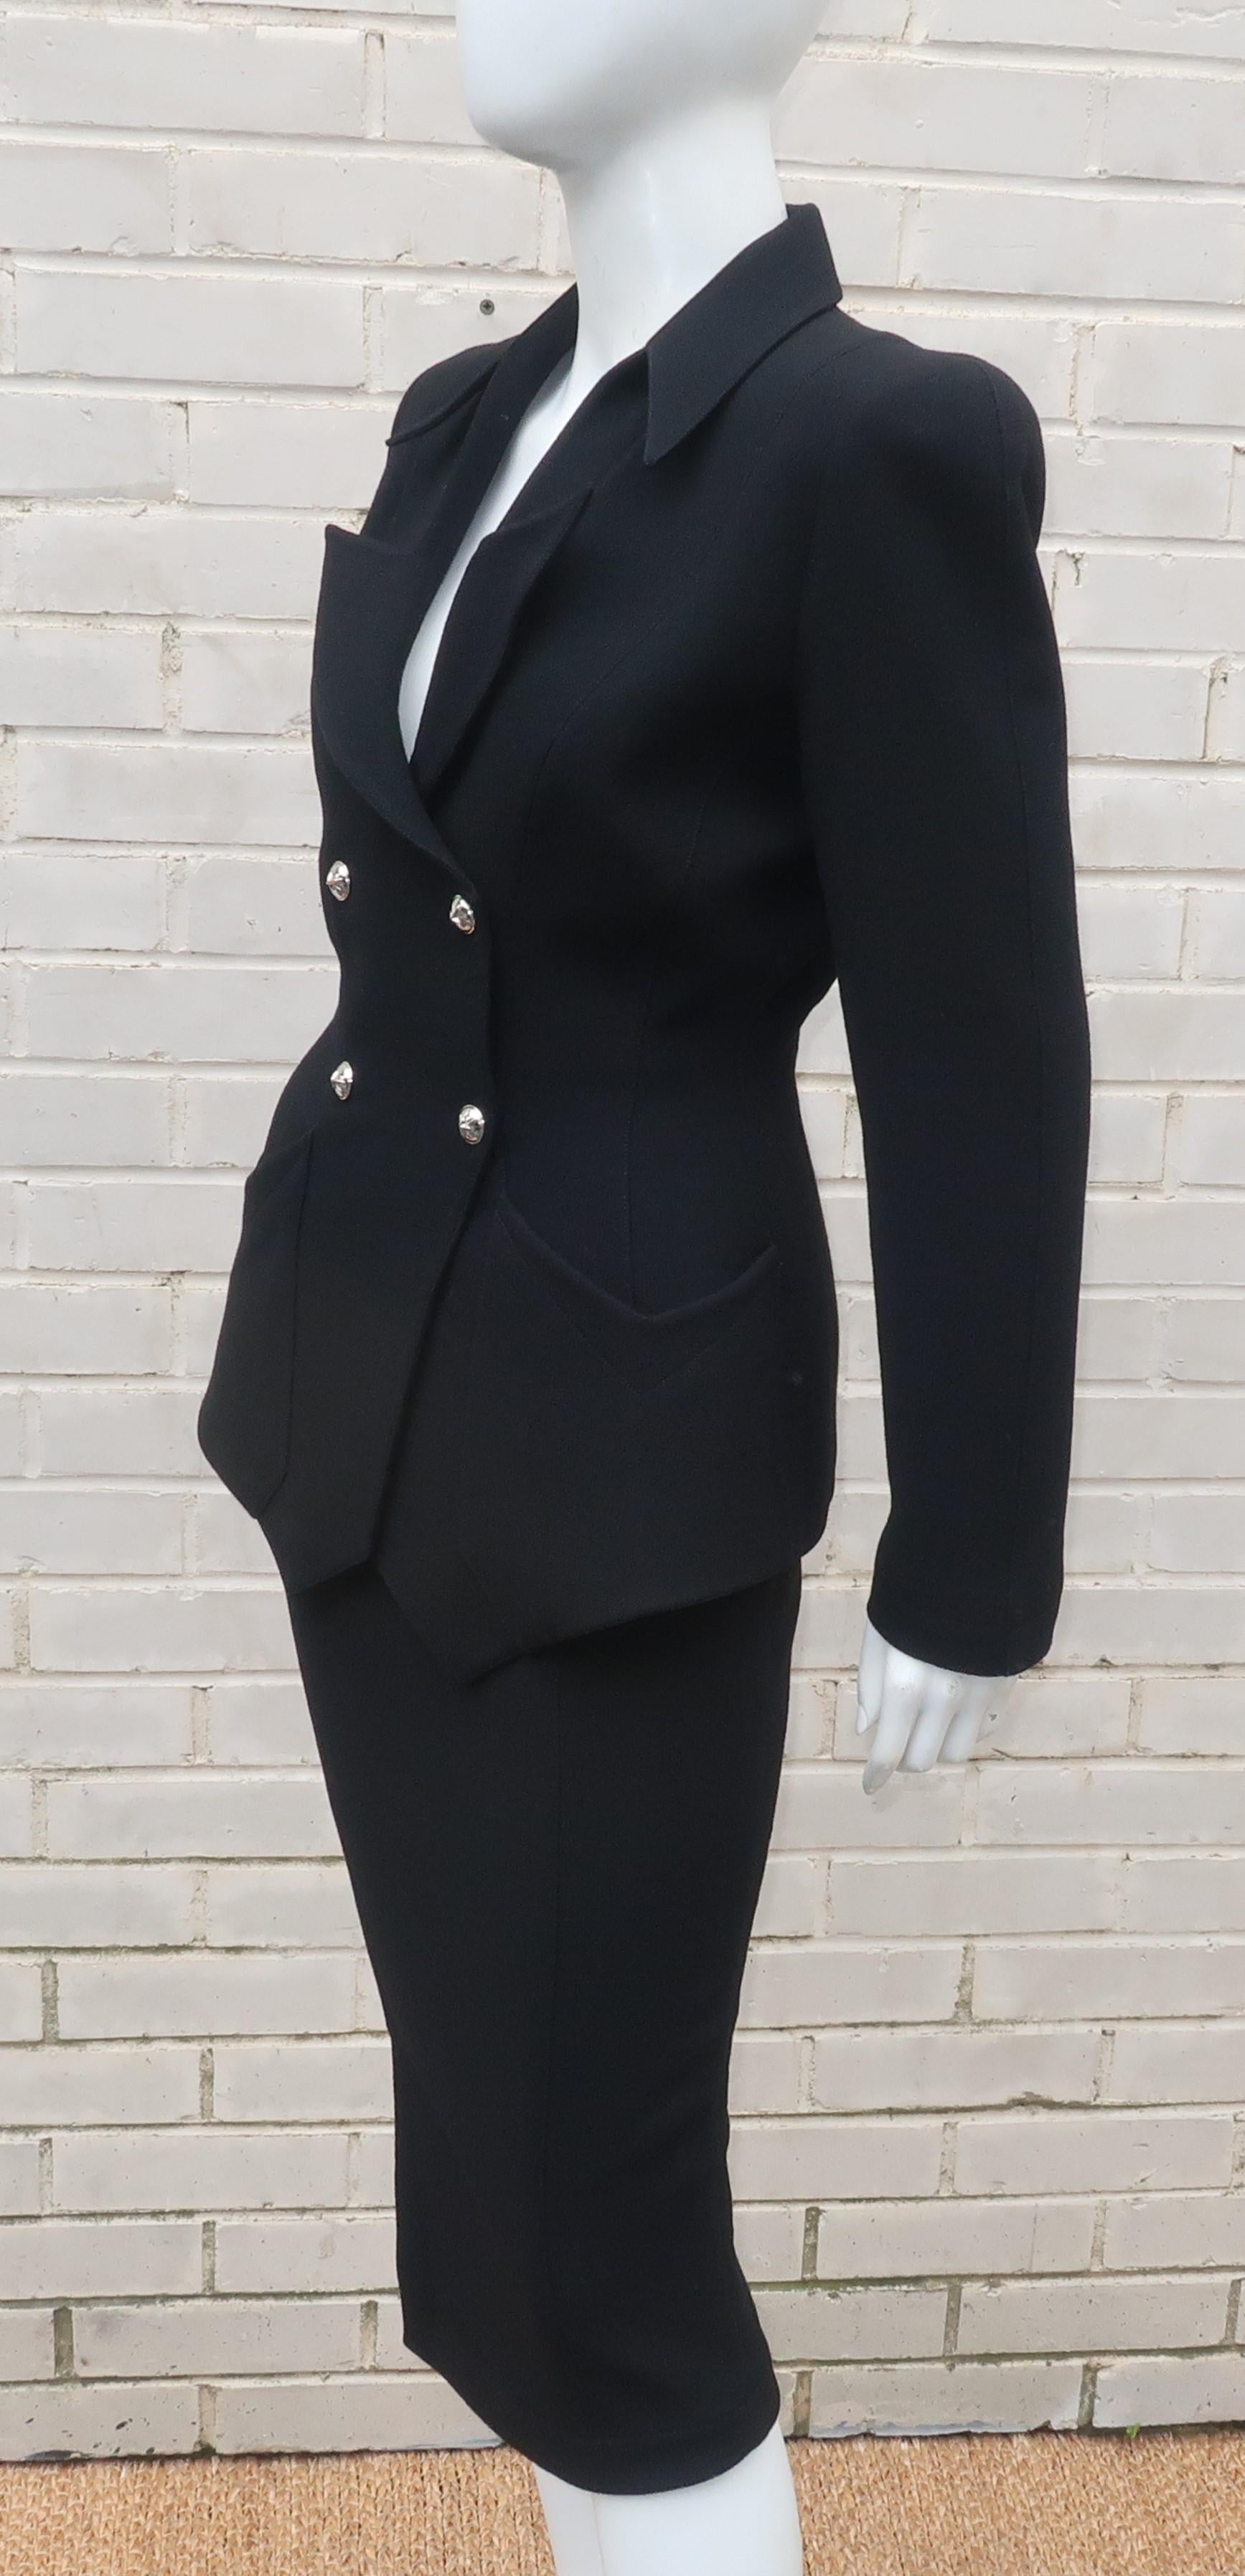 Women's Thierry Mugler Black Skirt Suit With Star Buttons